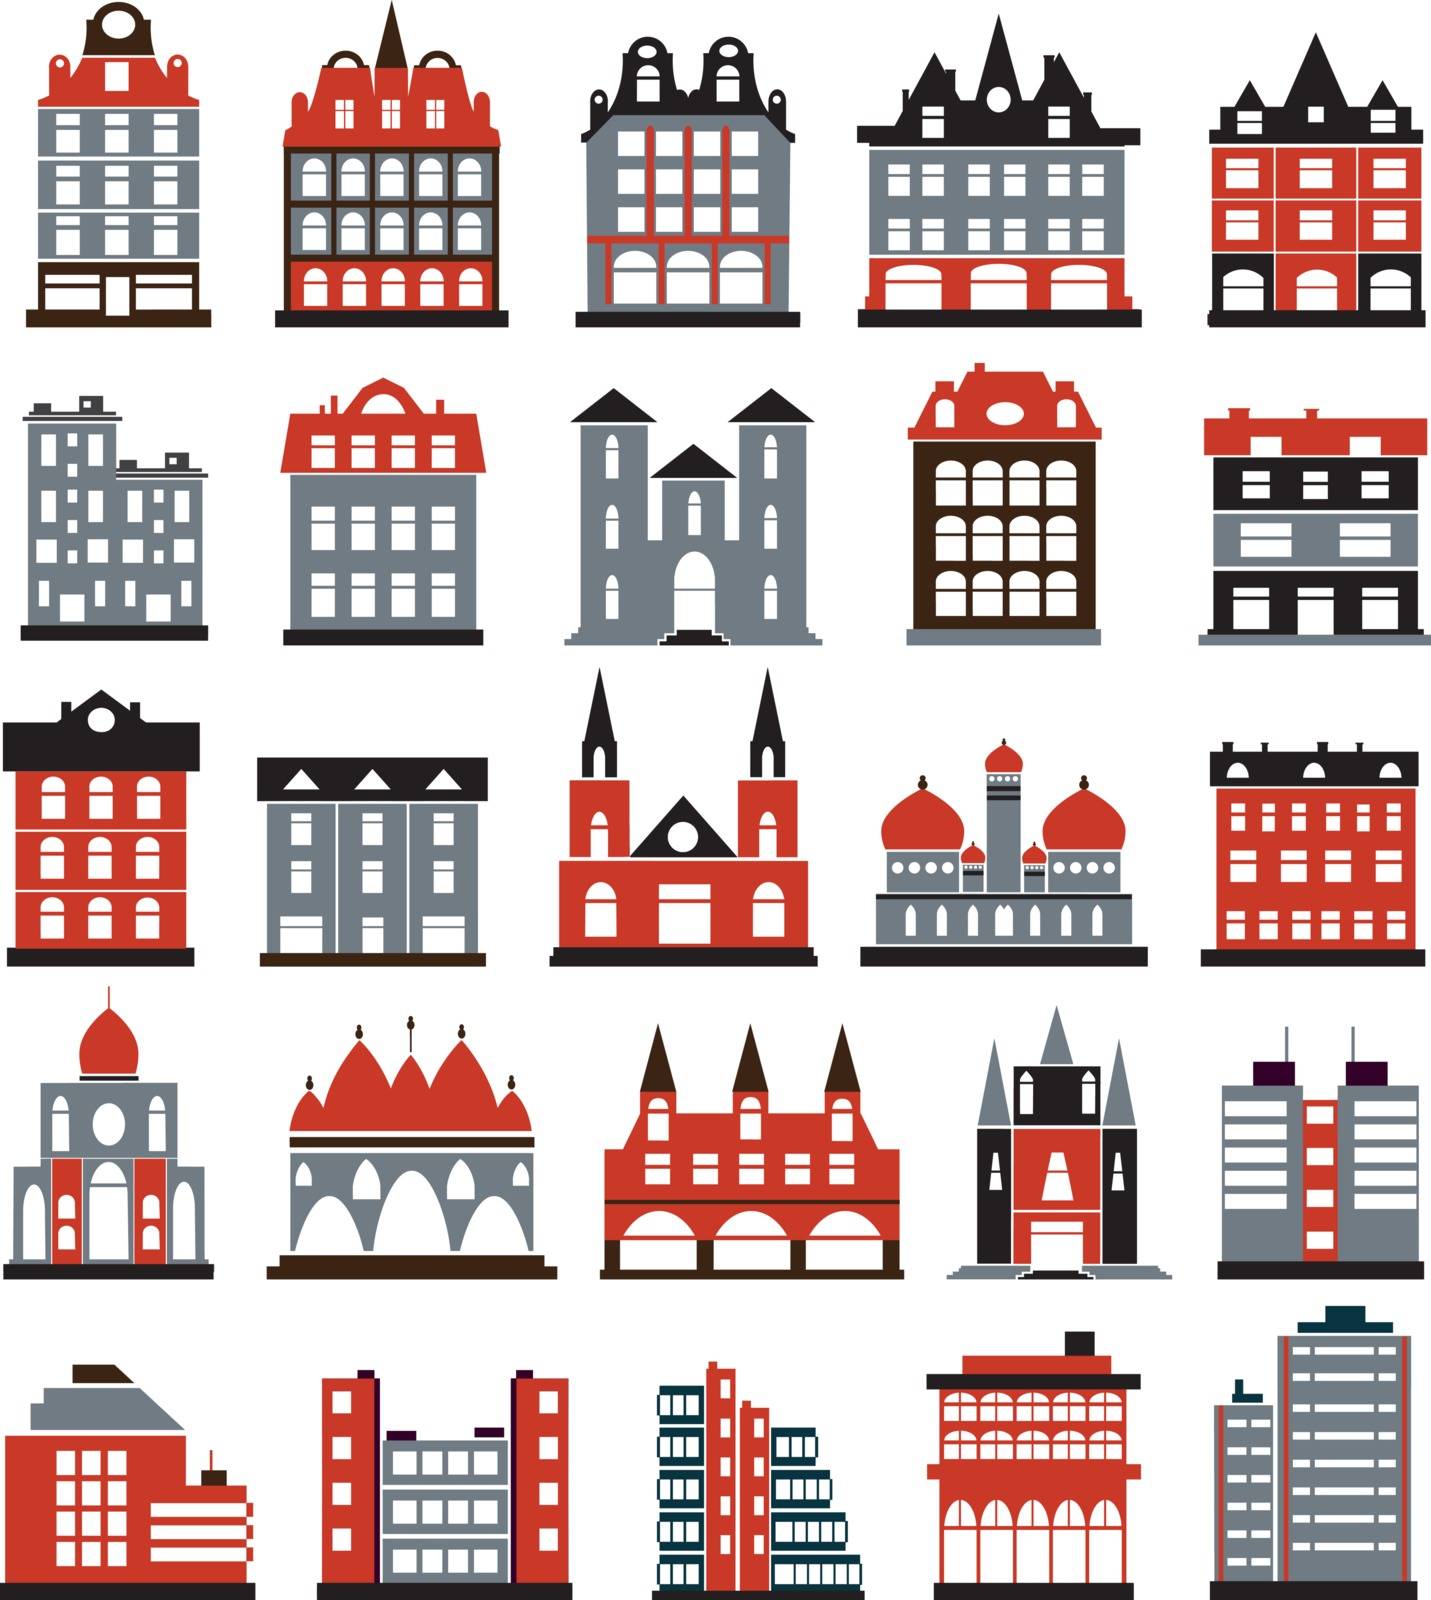 Colored silhouettes of city buildings on a white background